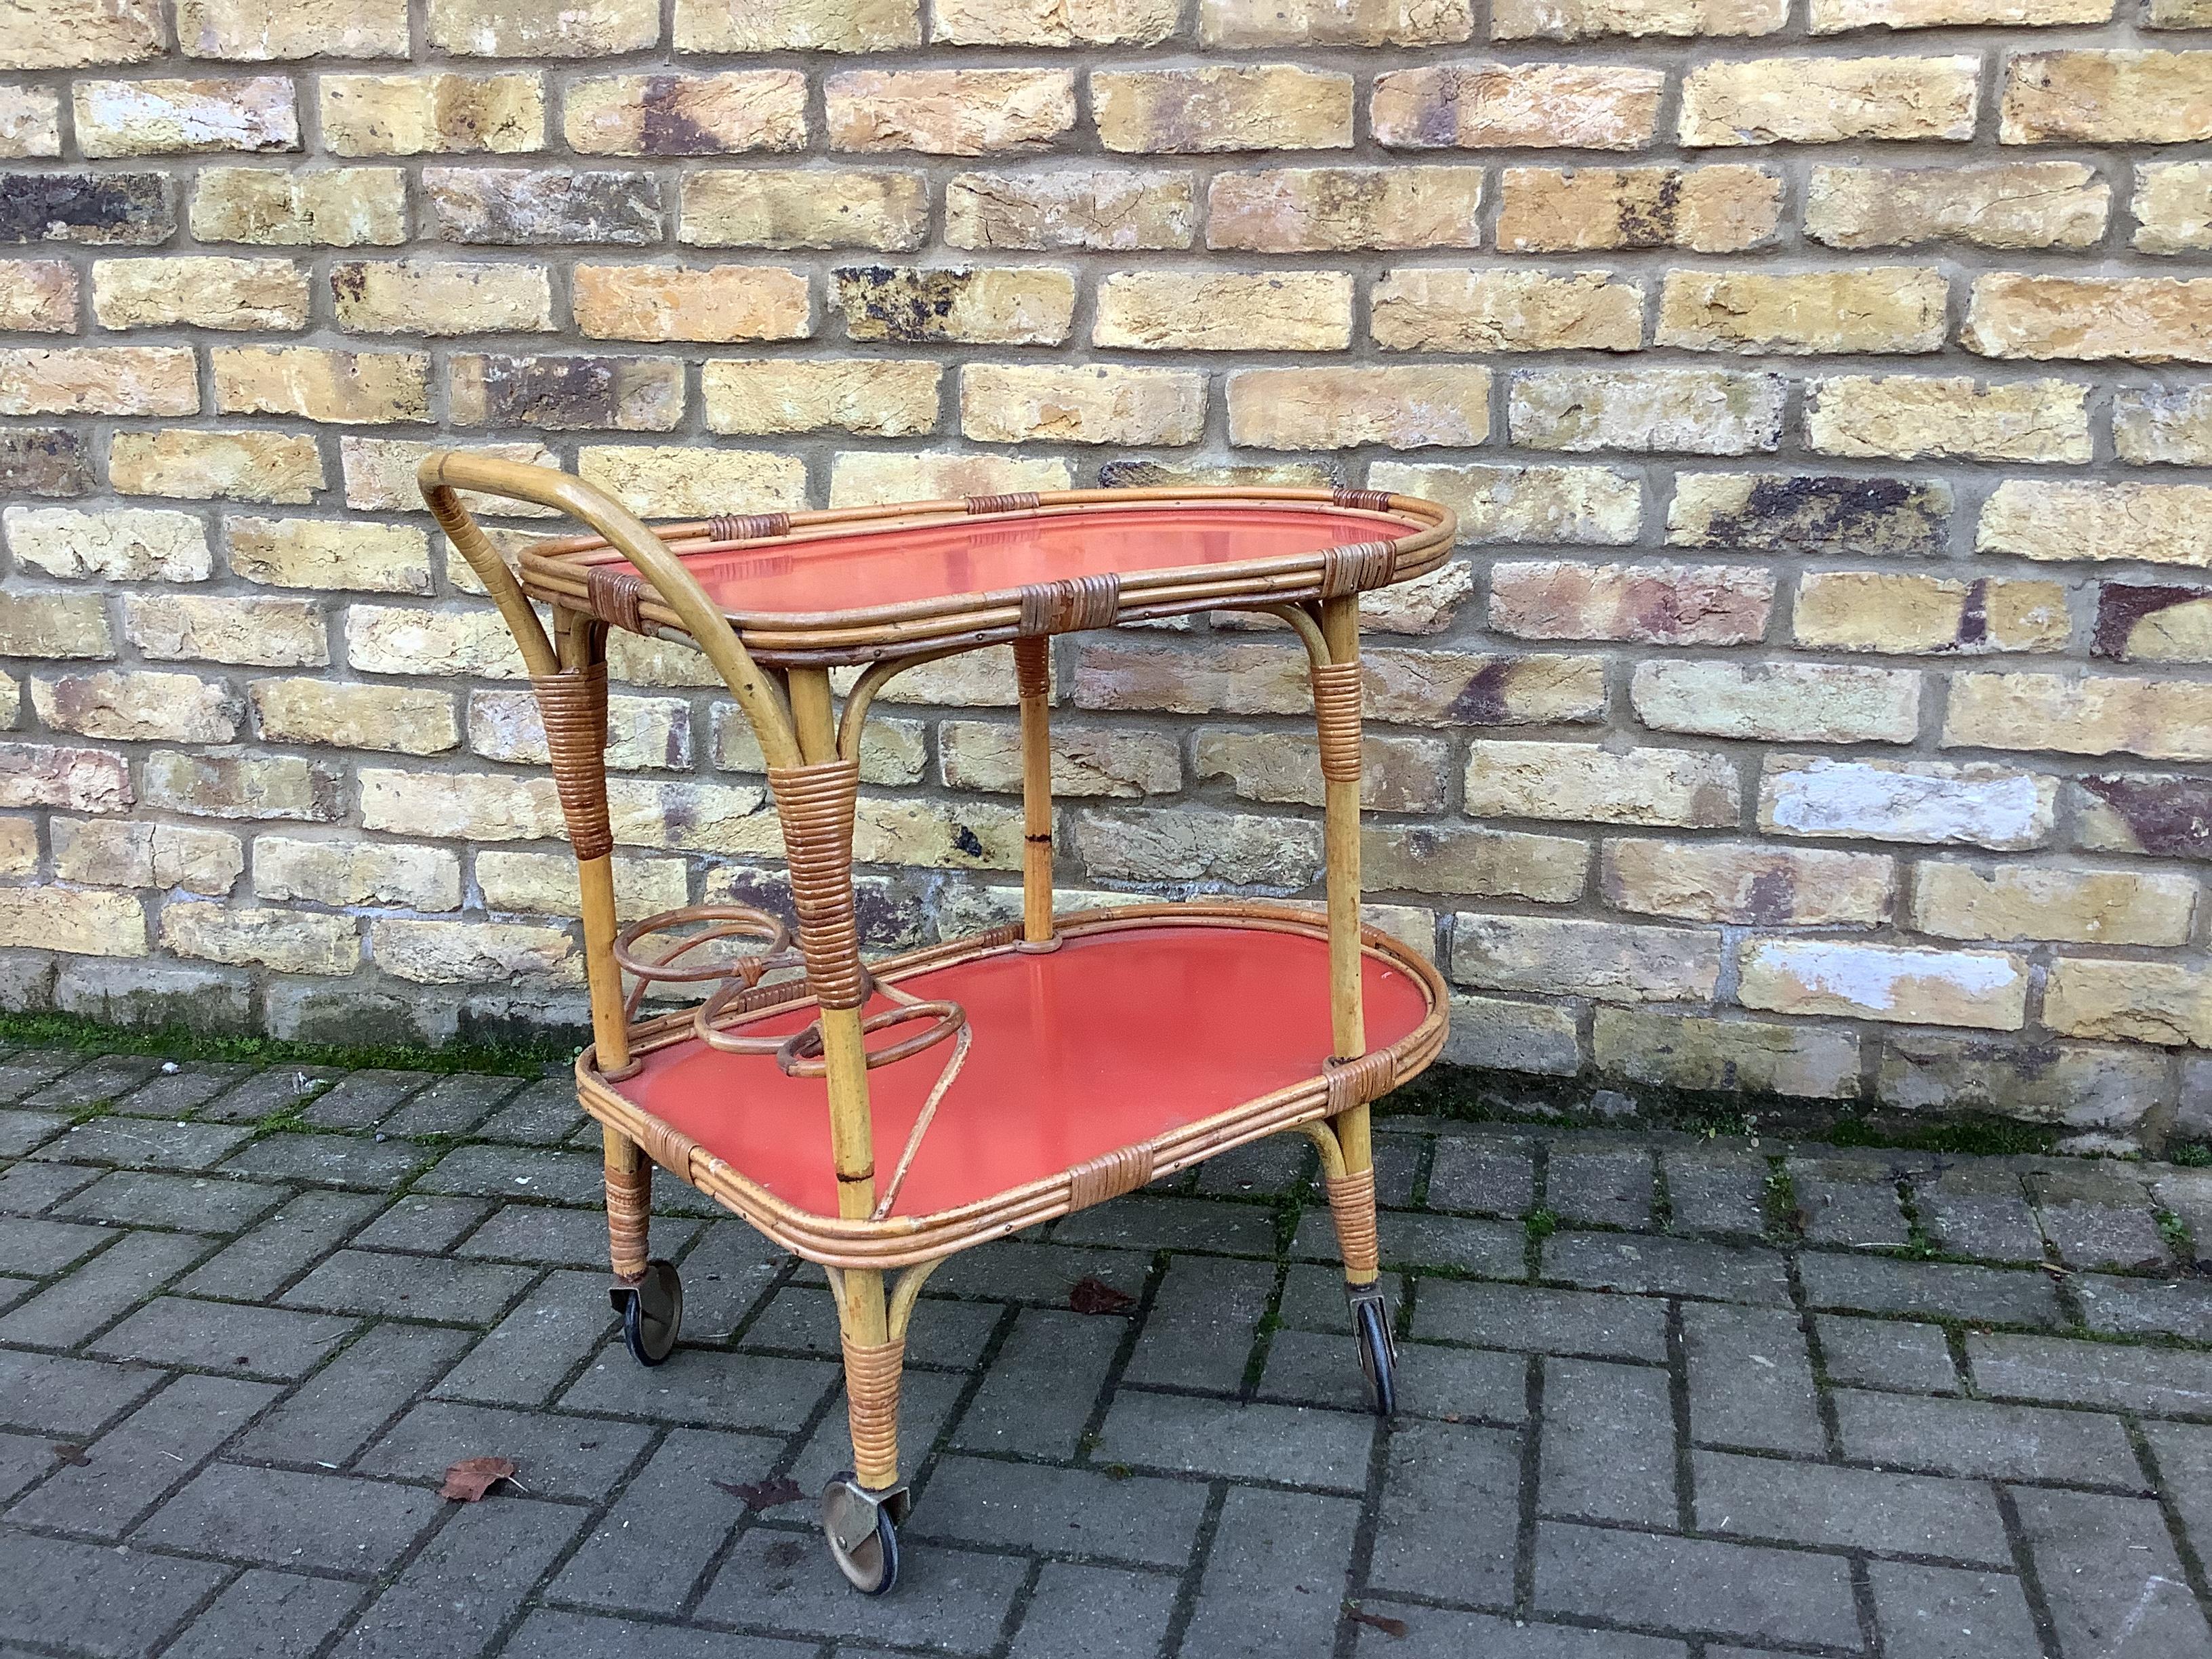 Bamboo drinks Trolley double shelving with red formica bases
Bottom shelve has 3 bottle holders woven out of the main body. Bar sits on 4 wheel castors.ideal drinks serving trolley.